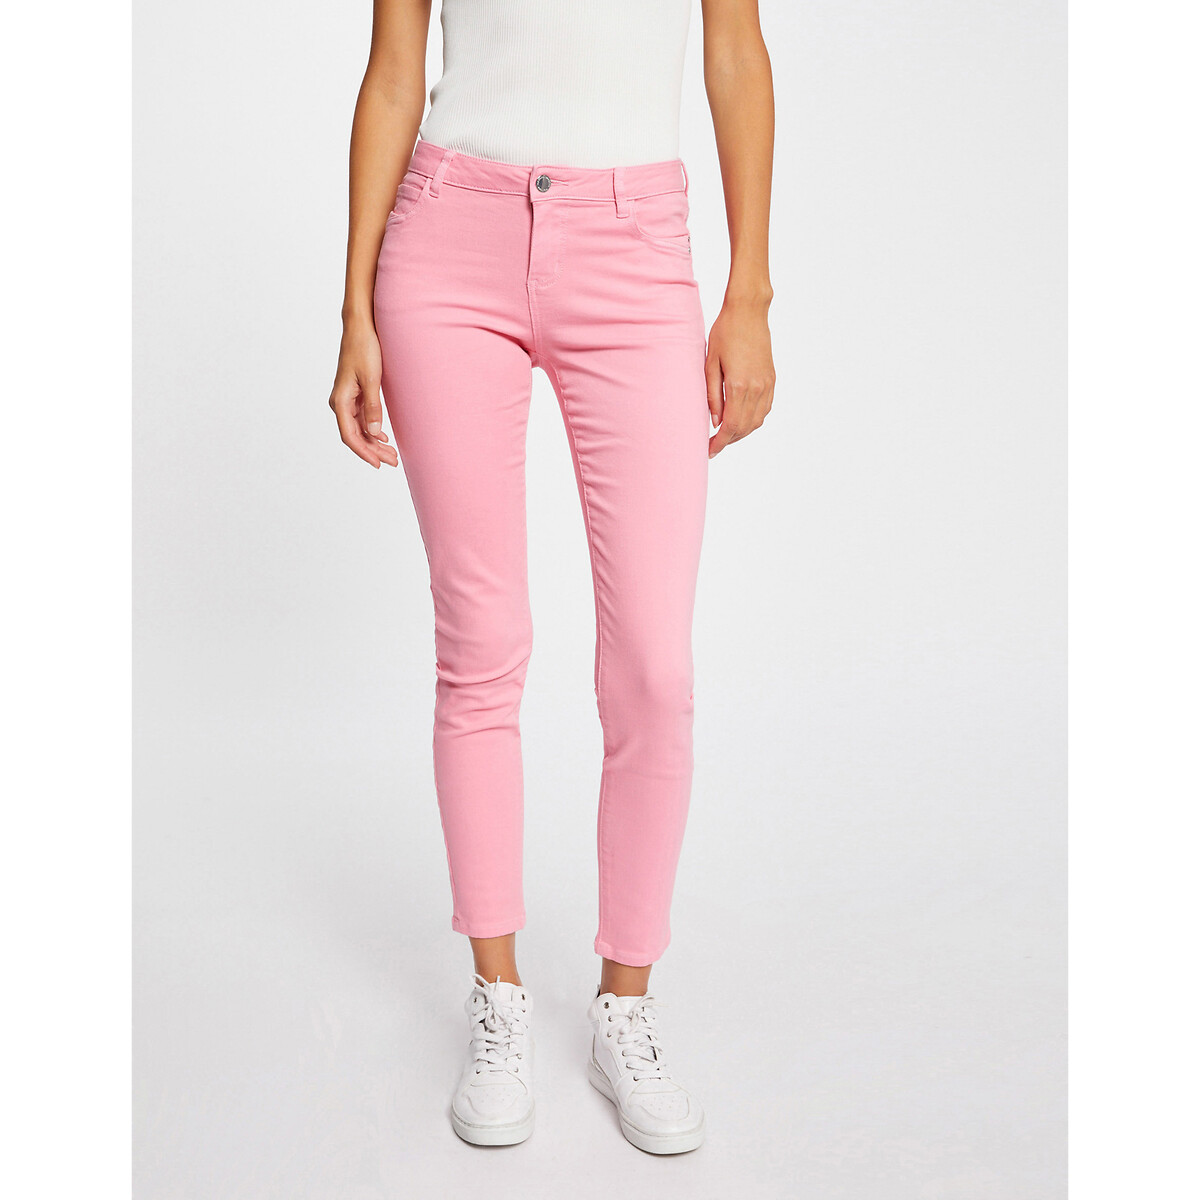 Image of Cotton Mix Trousers in Slim Fit